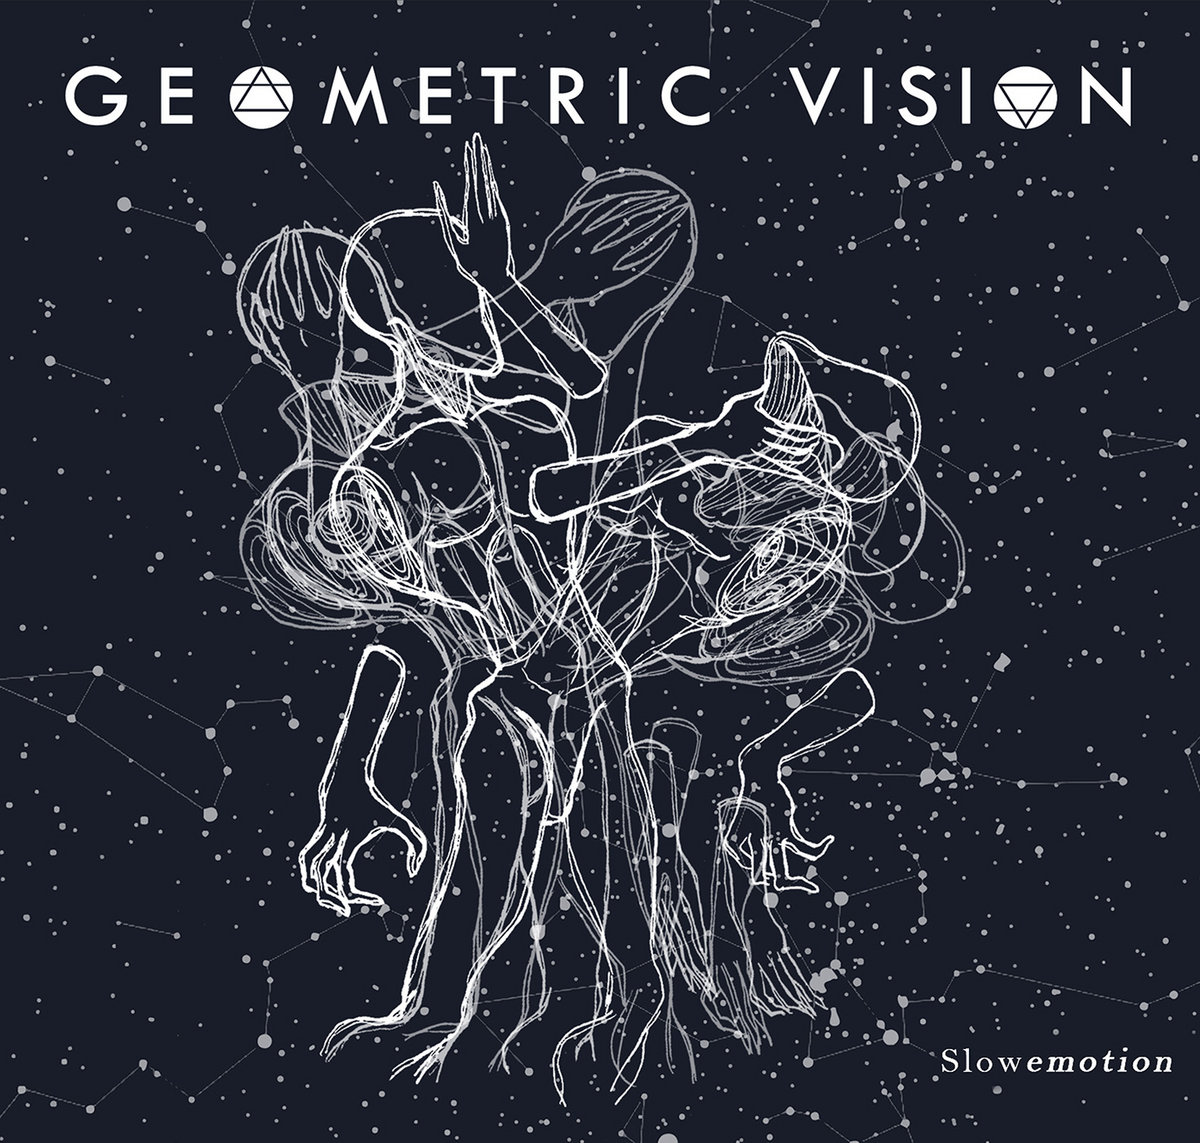 Geometric Vision cover